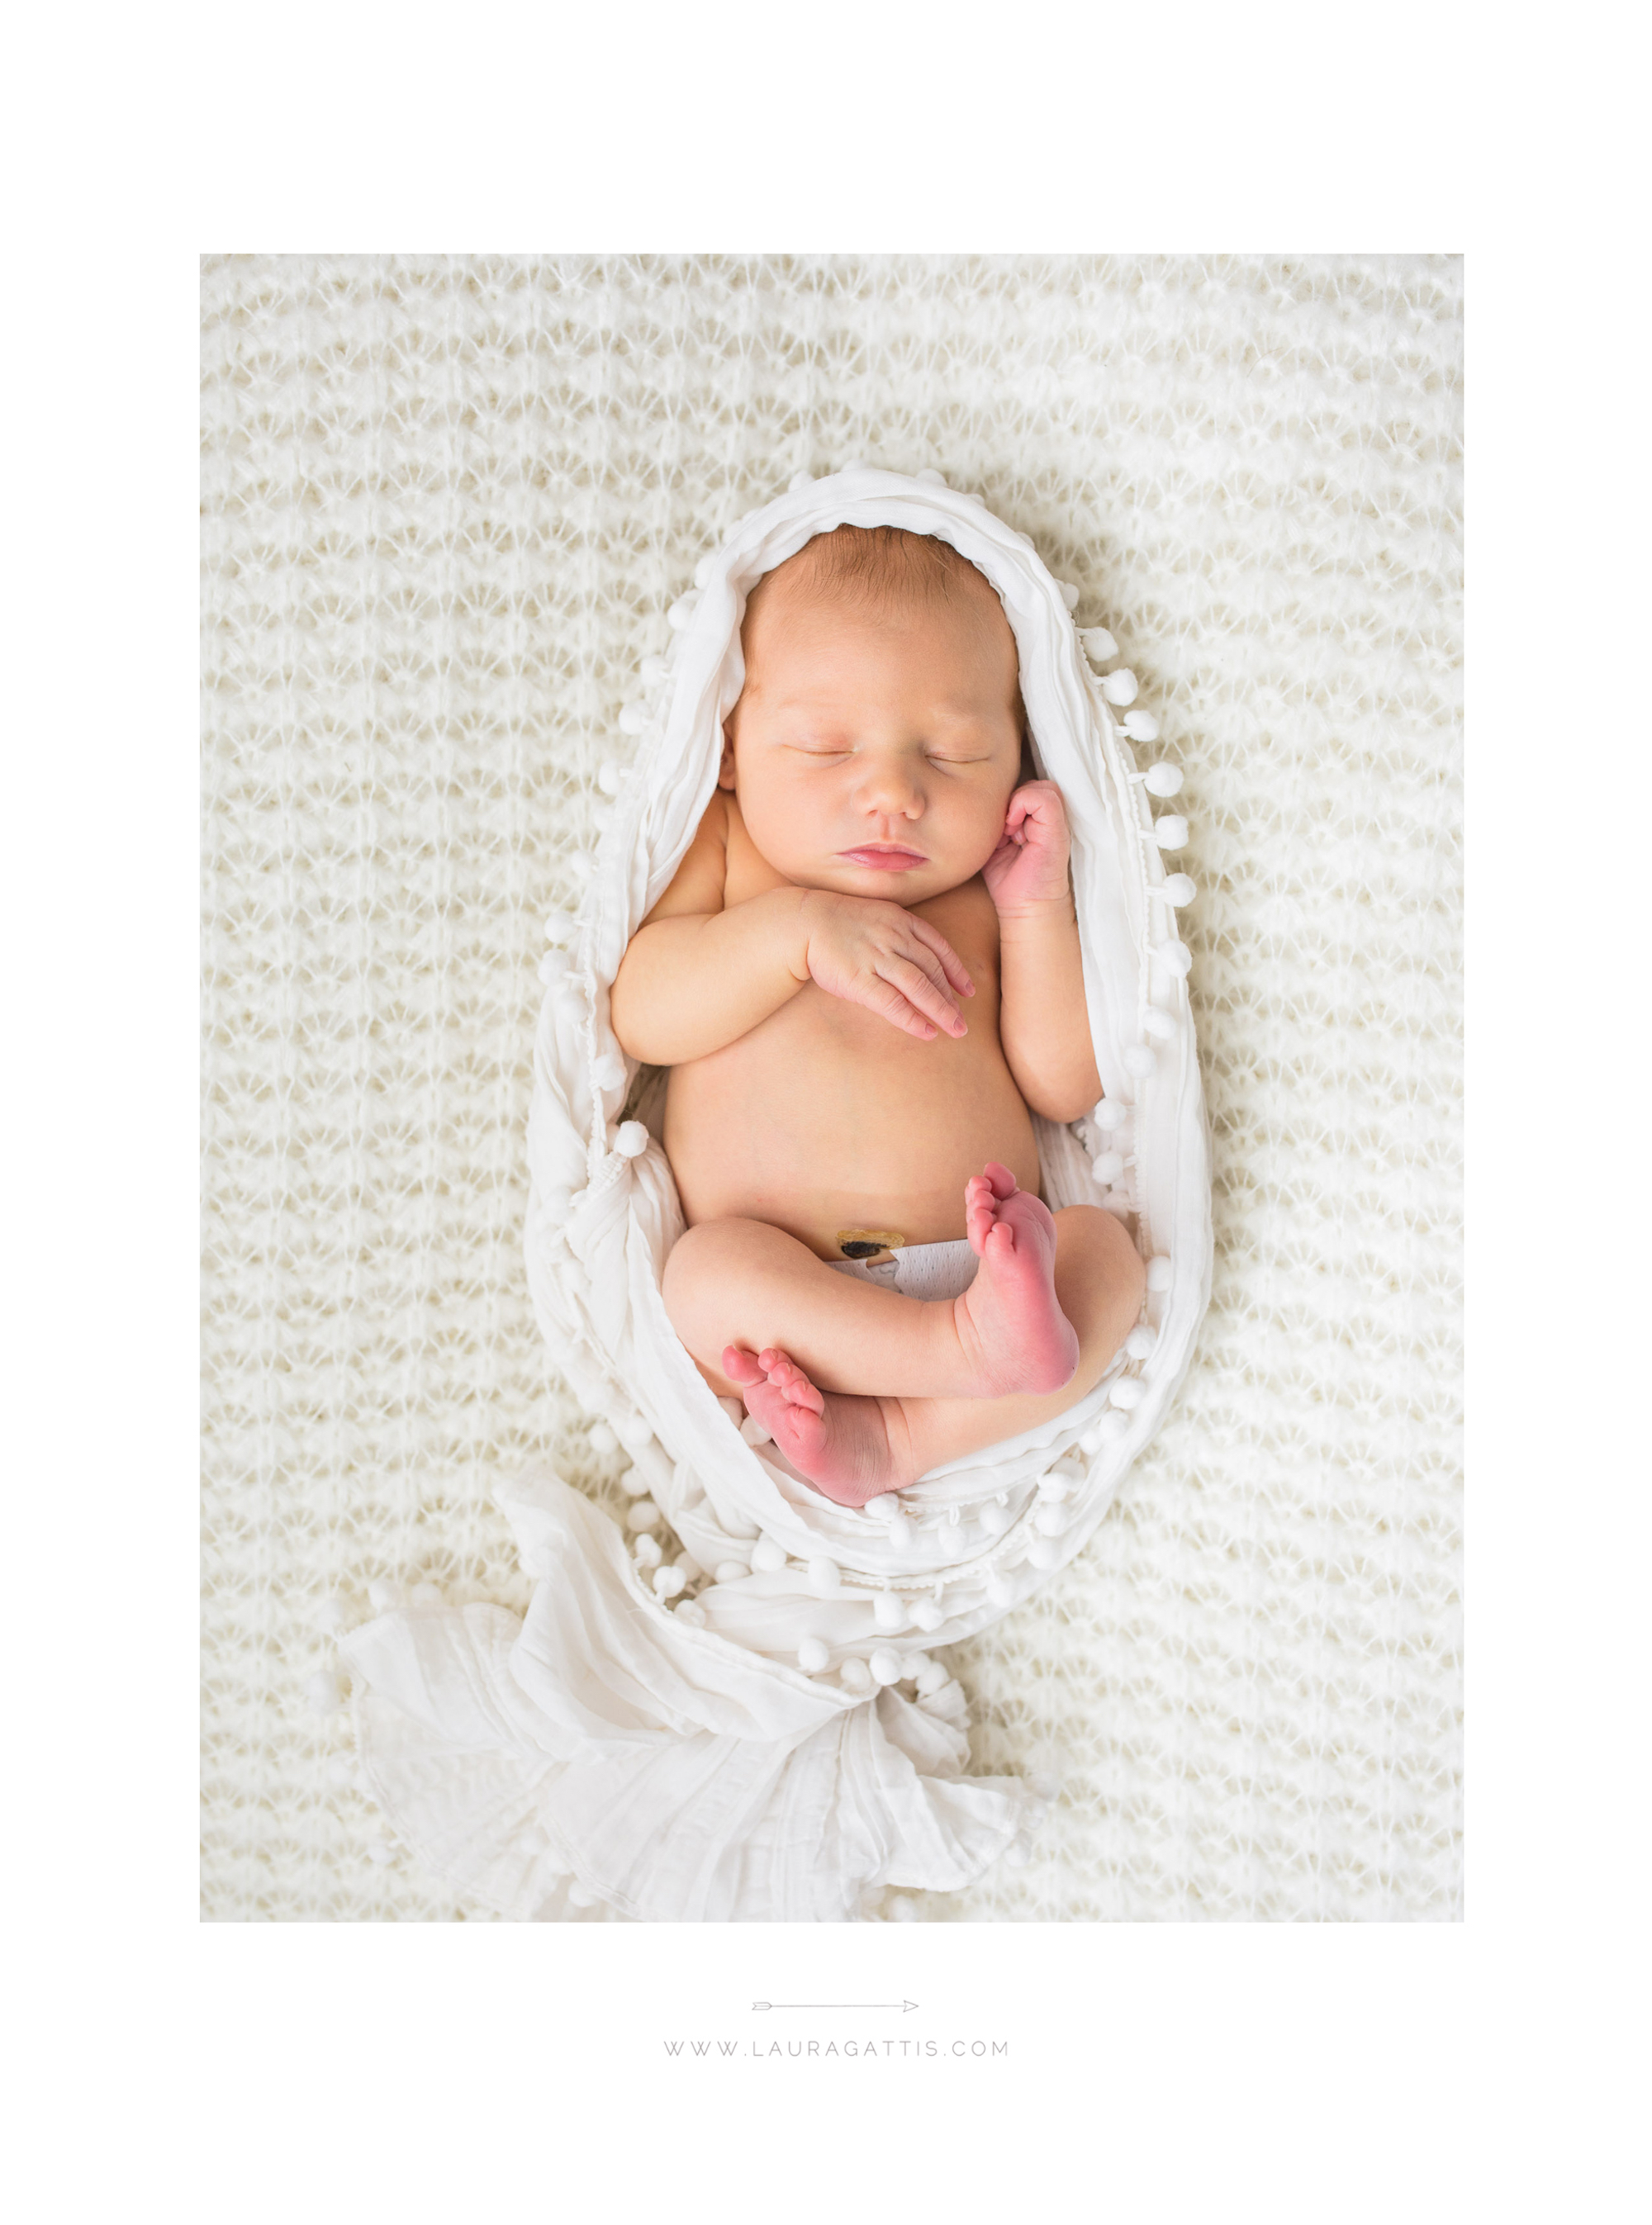 natural light studio newborn and sibling session | laura gattis photography